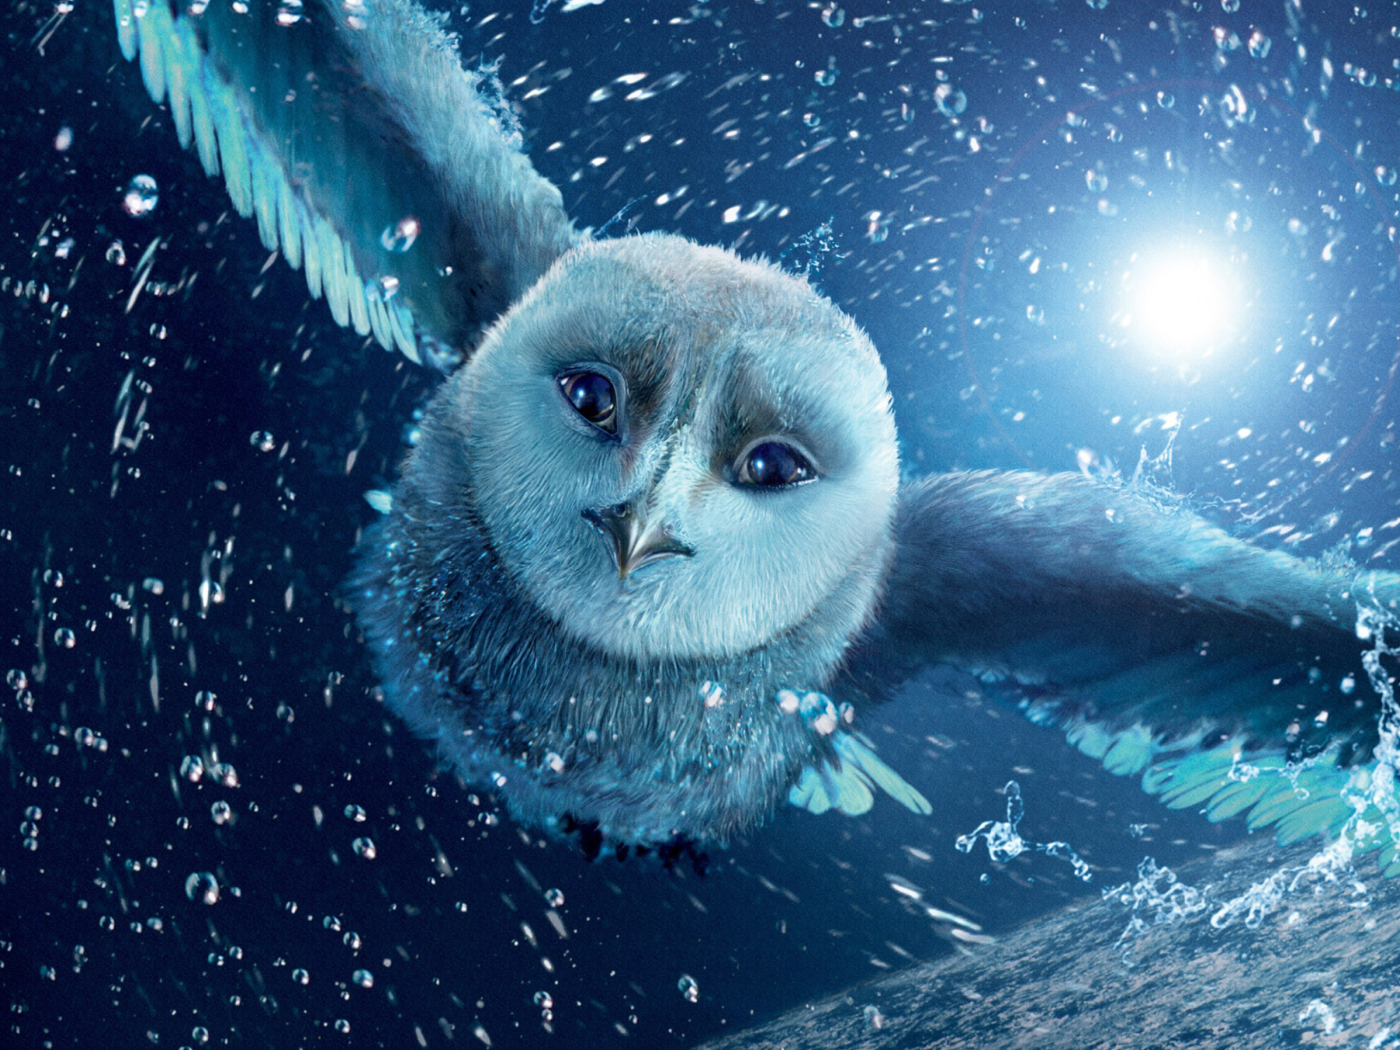 Legend Of The Guardians The Owls Of Ga Hoole wallpaper 1400x1050